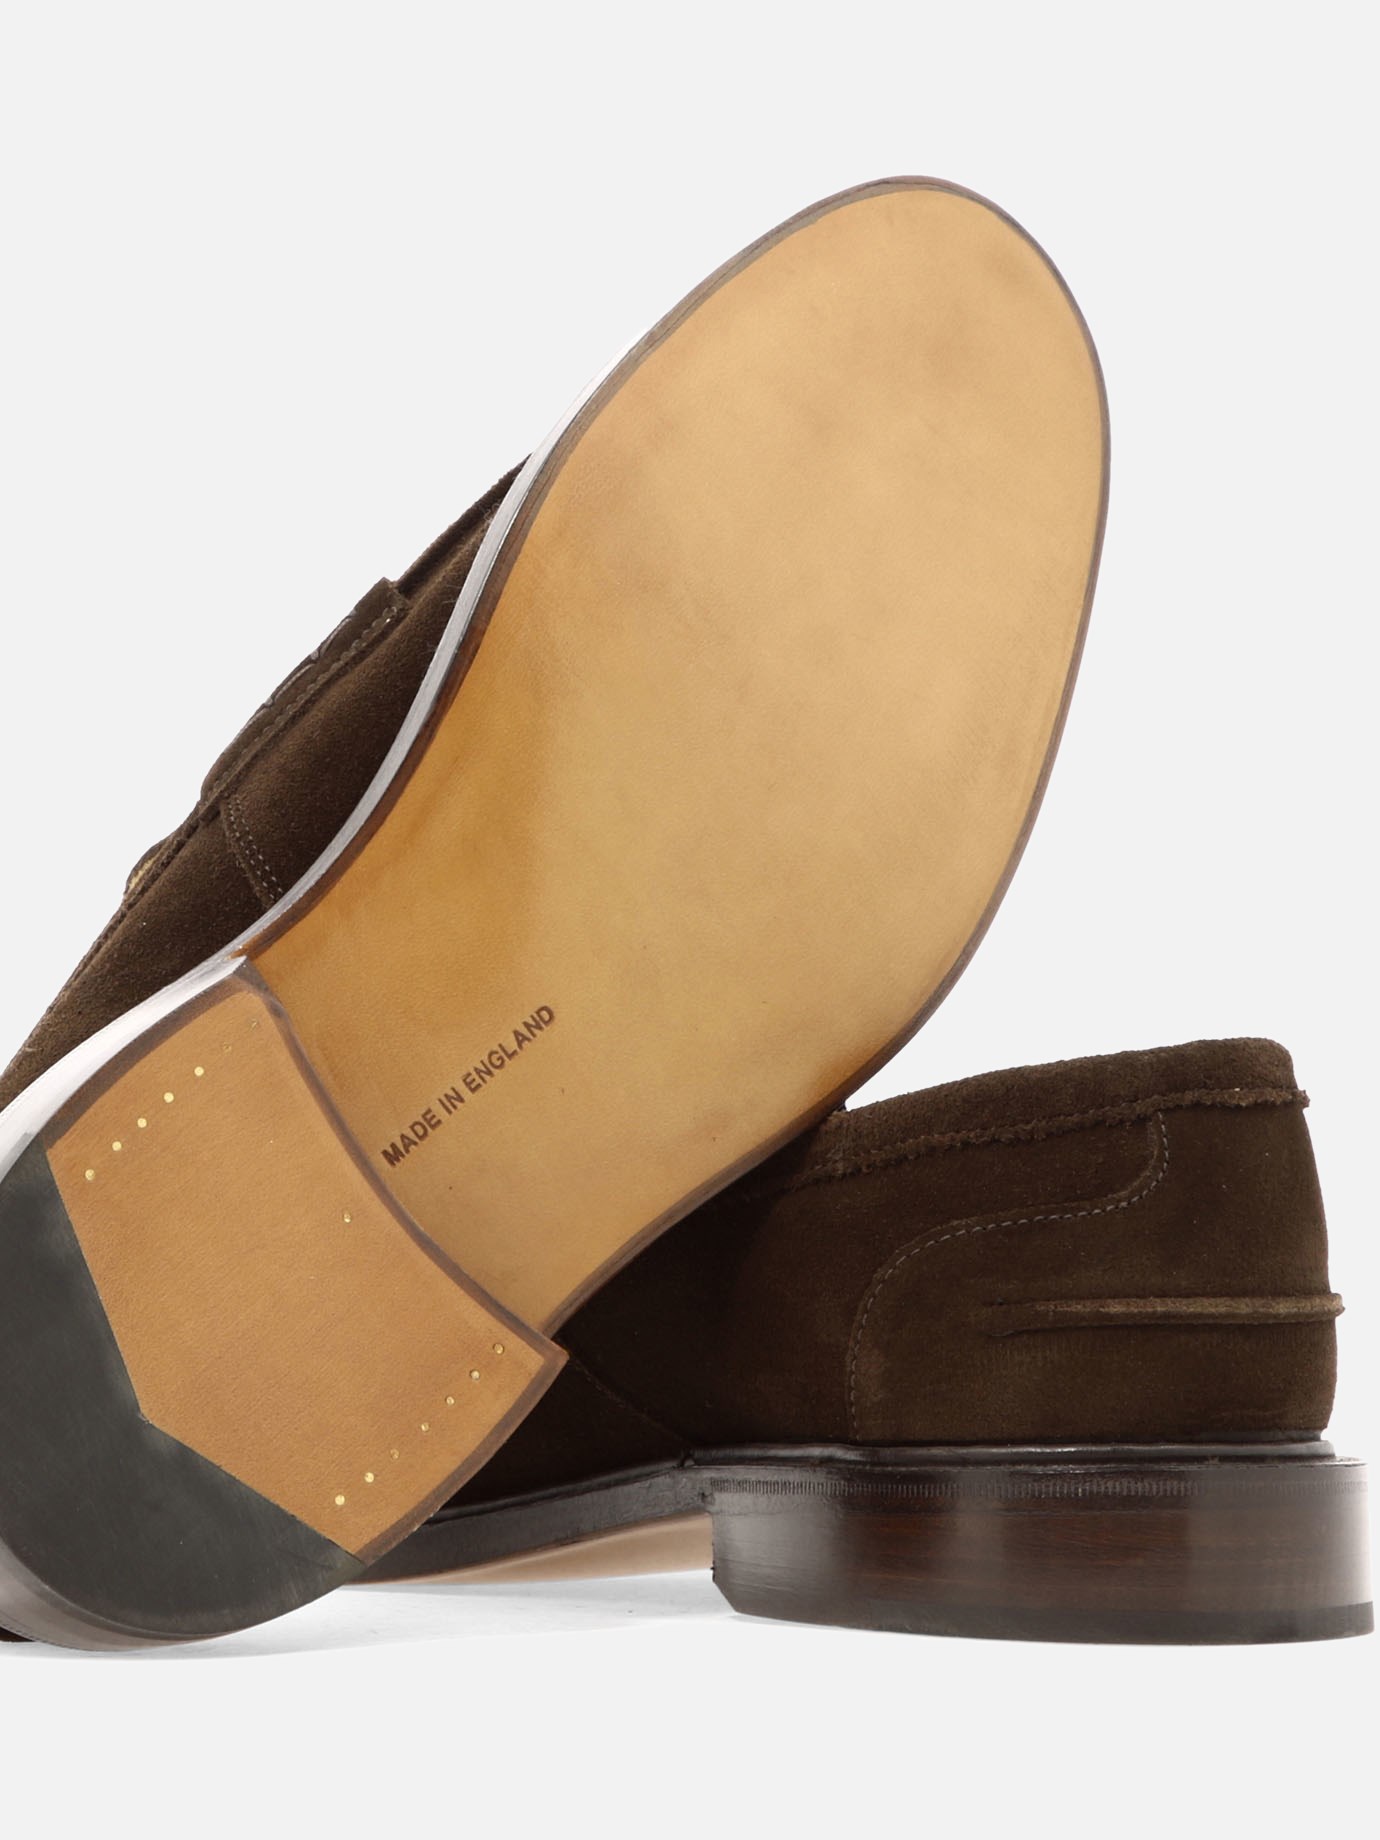  James  loafers by Tricker's